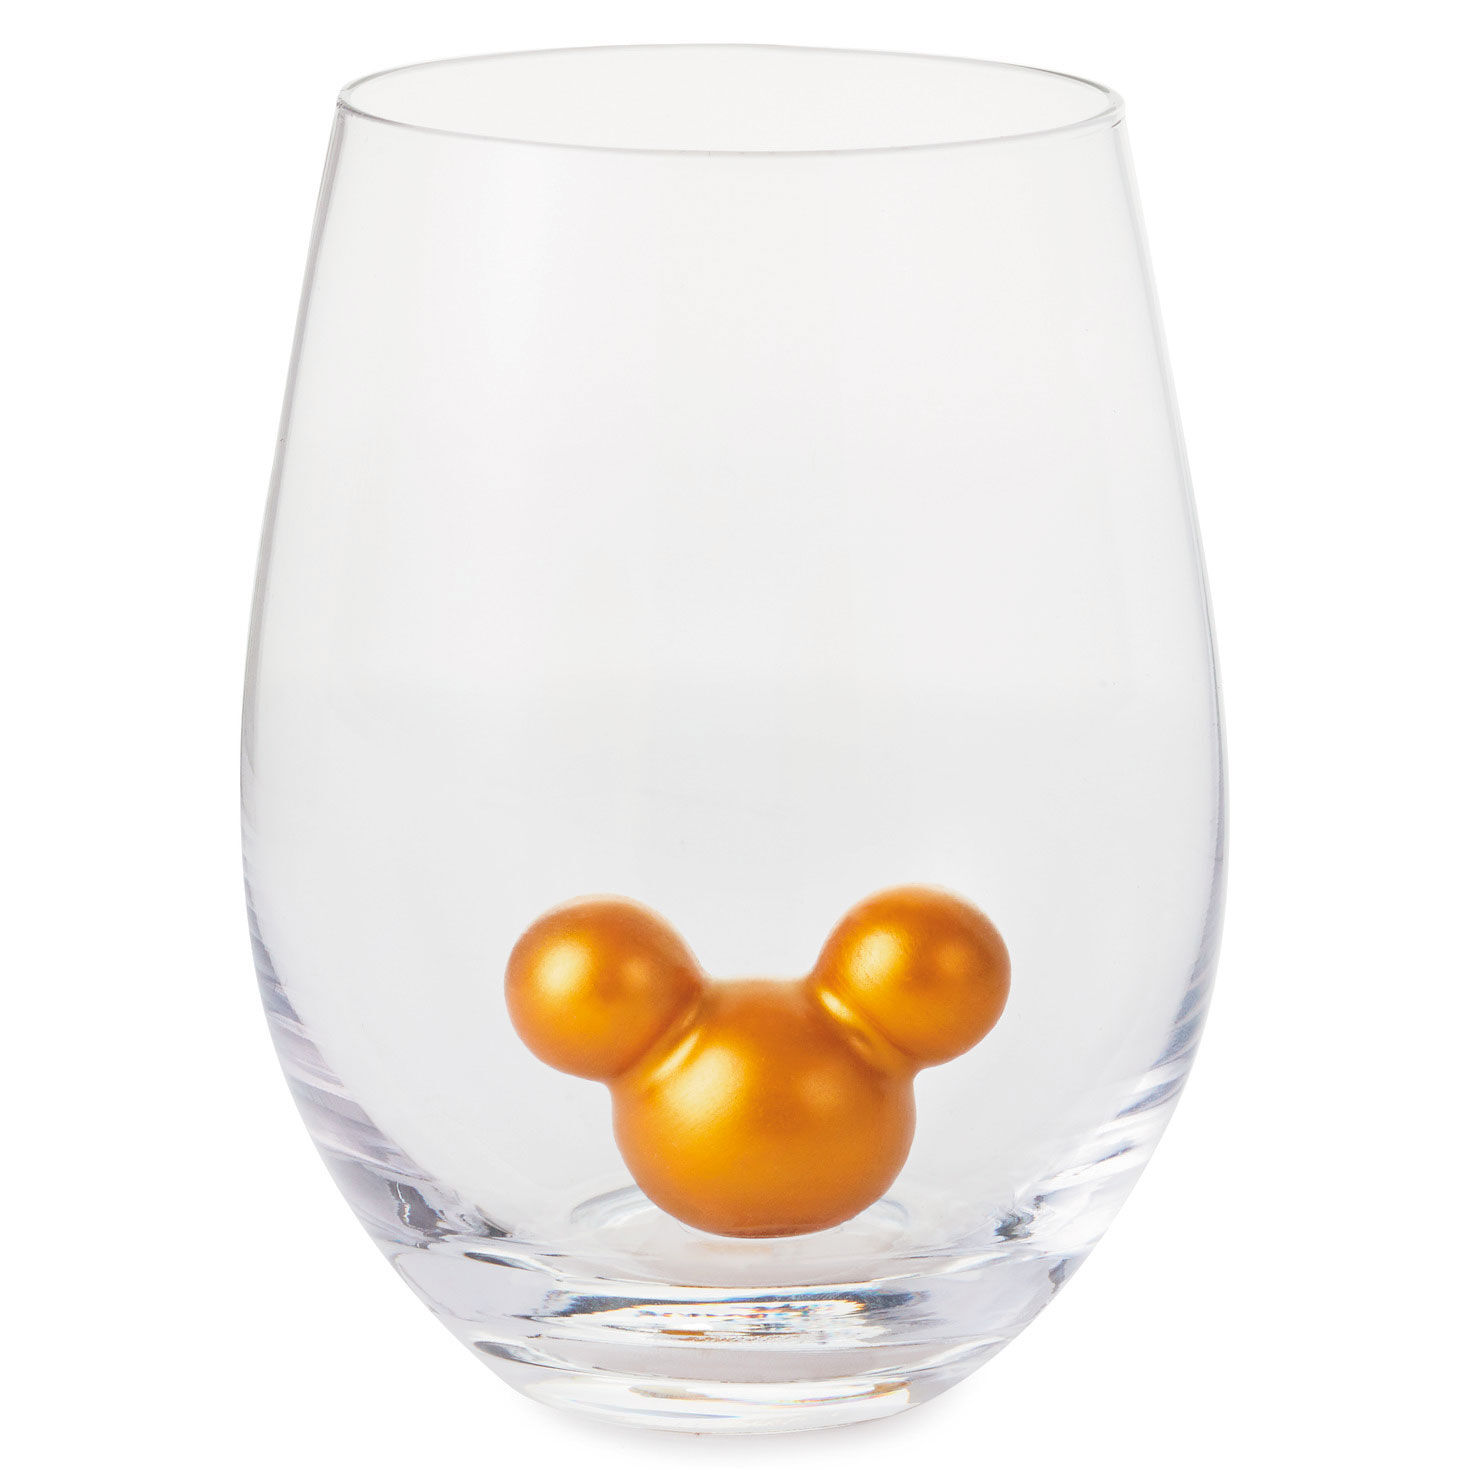 Mickey not at disney great gift wine glass stemless wine Disney Wine not at disney Disney gift